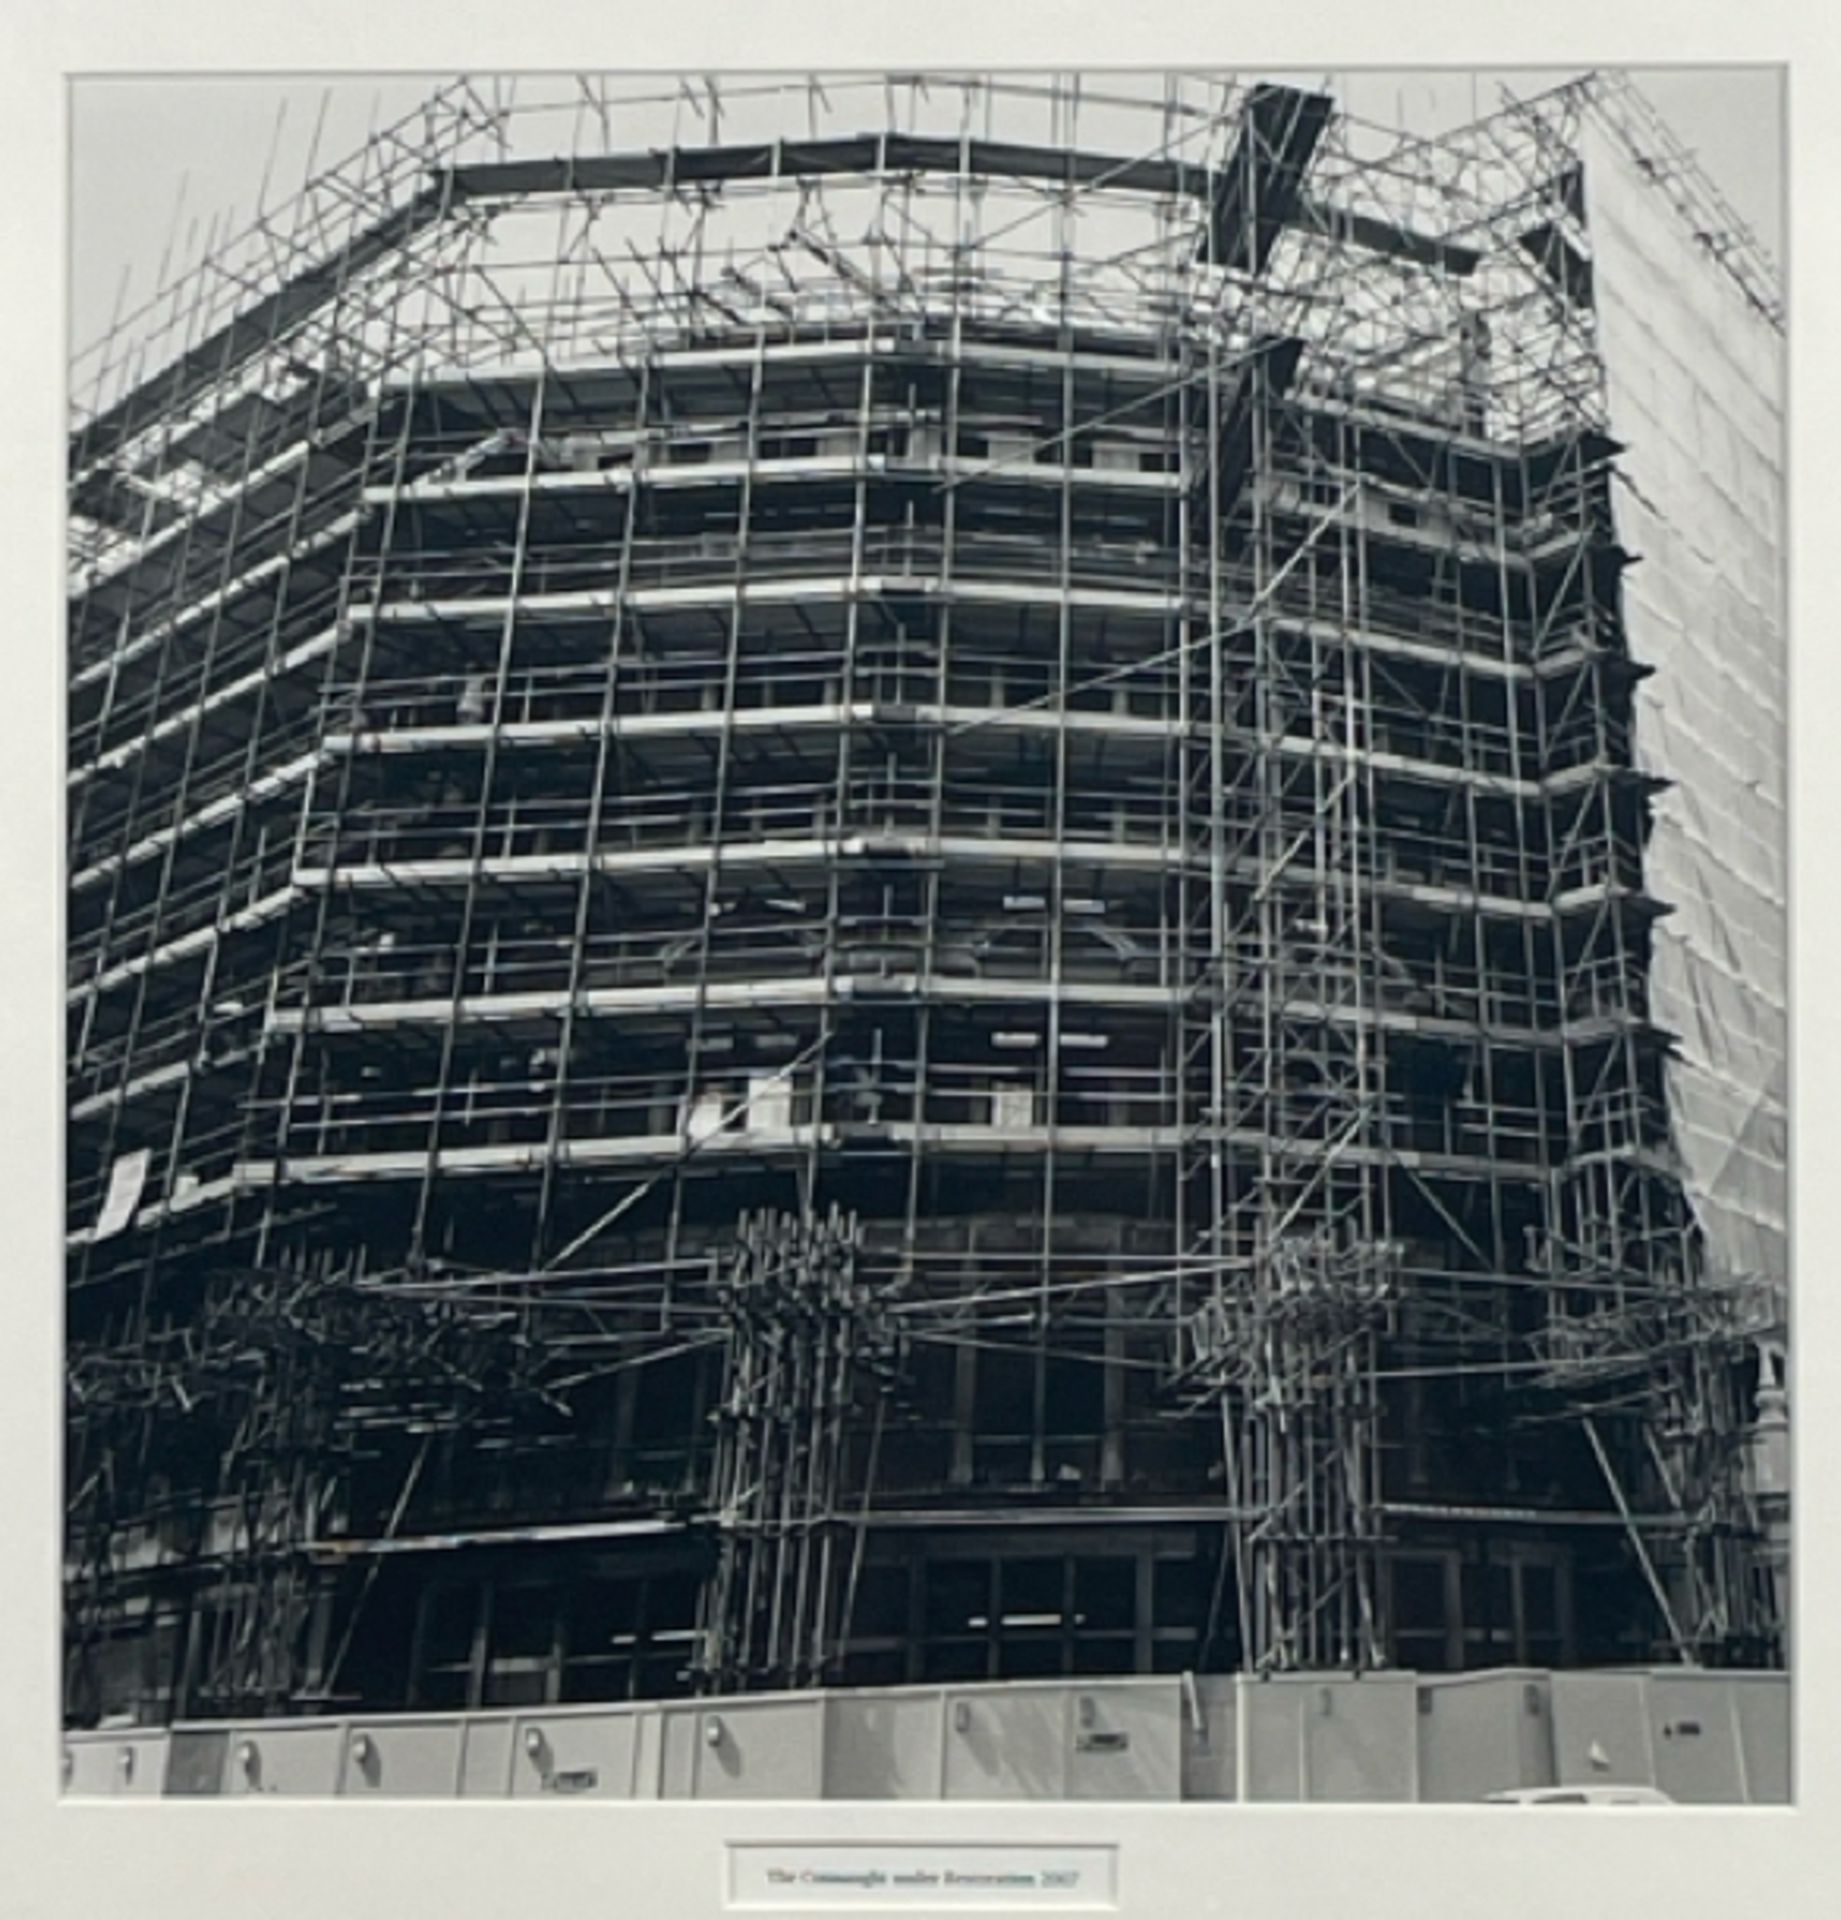 The Connaught Construction Artwork Print - Image 2 of 2